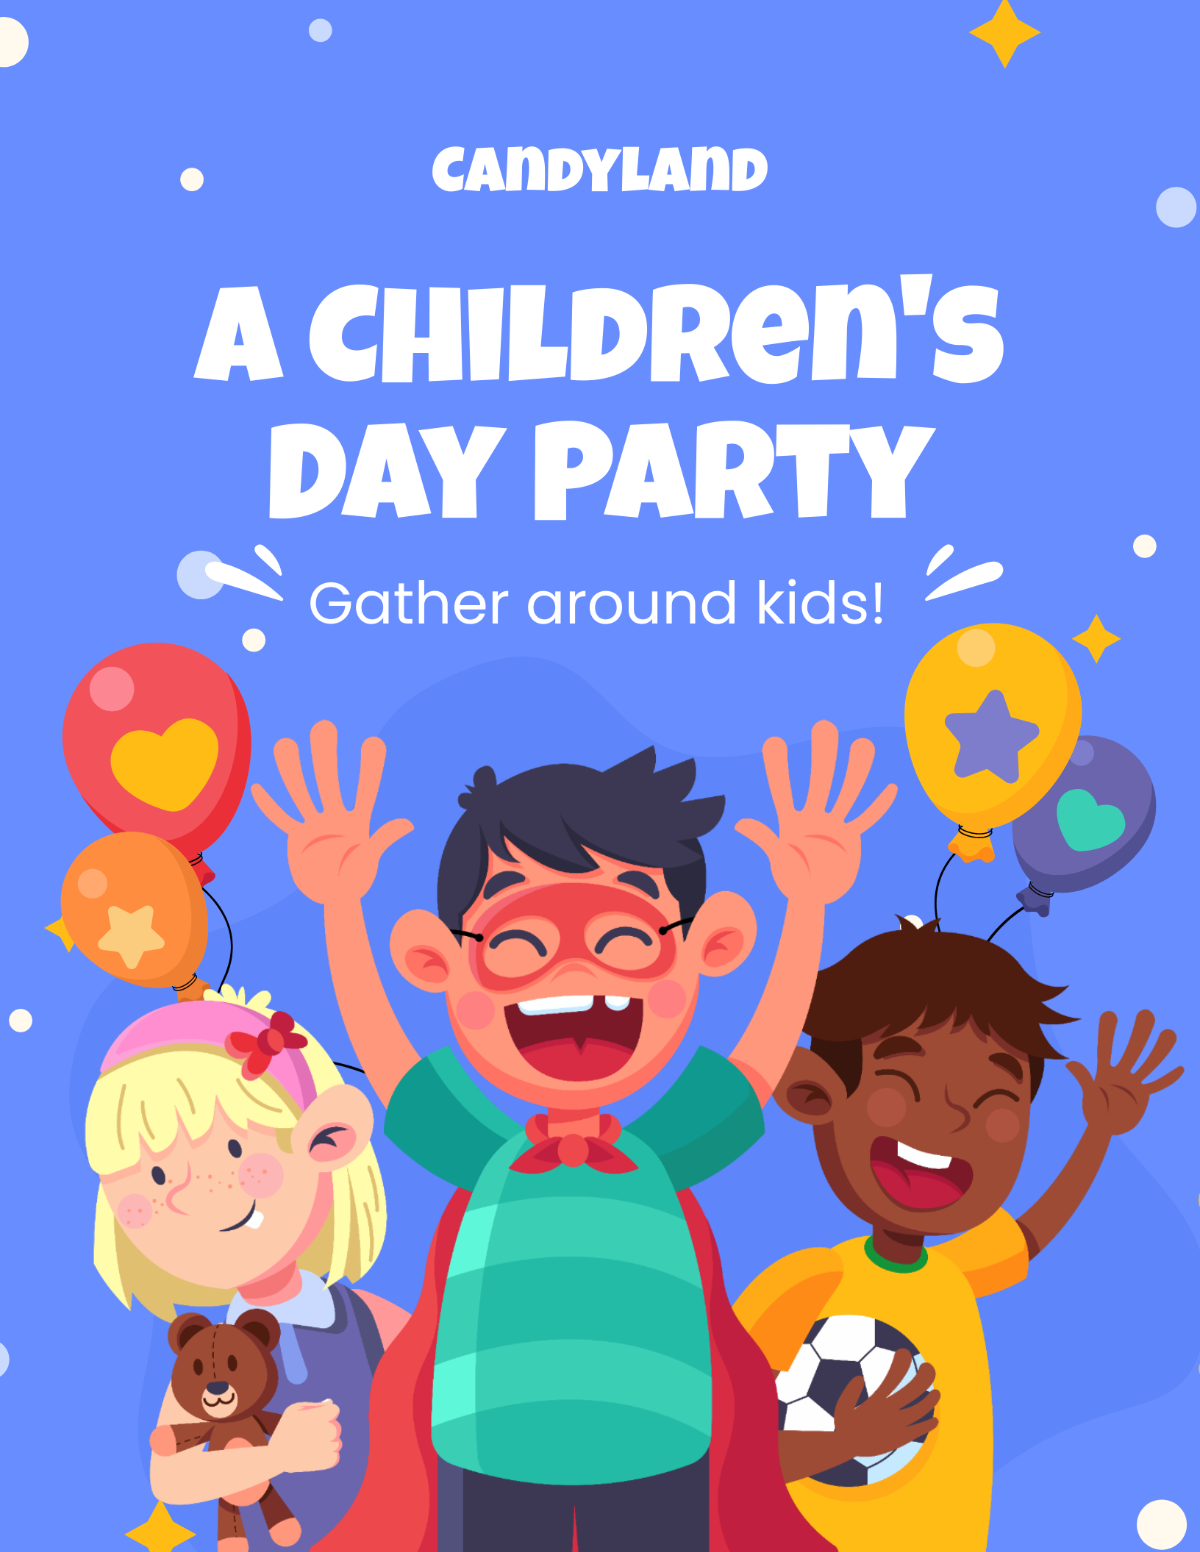 Children's Day Party Flyer Template